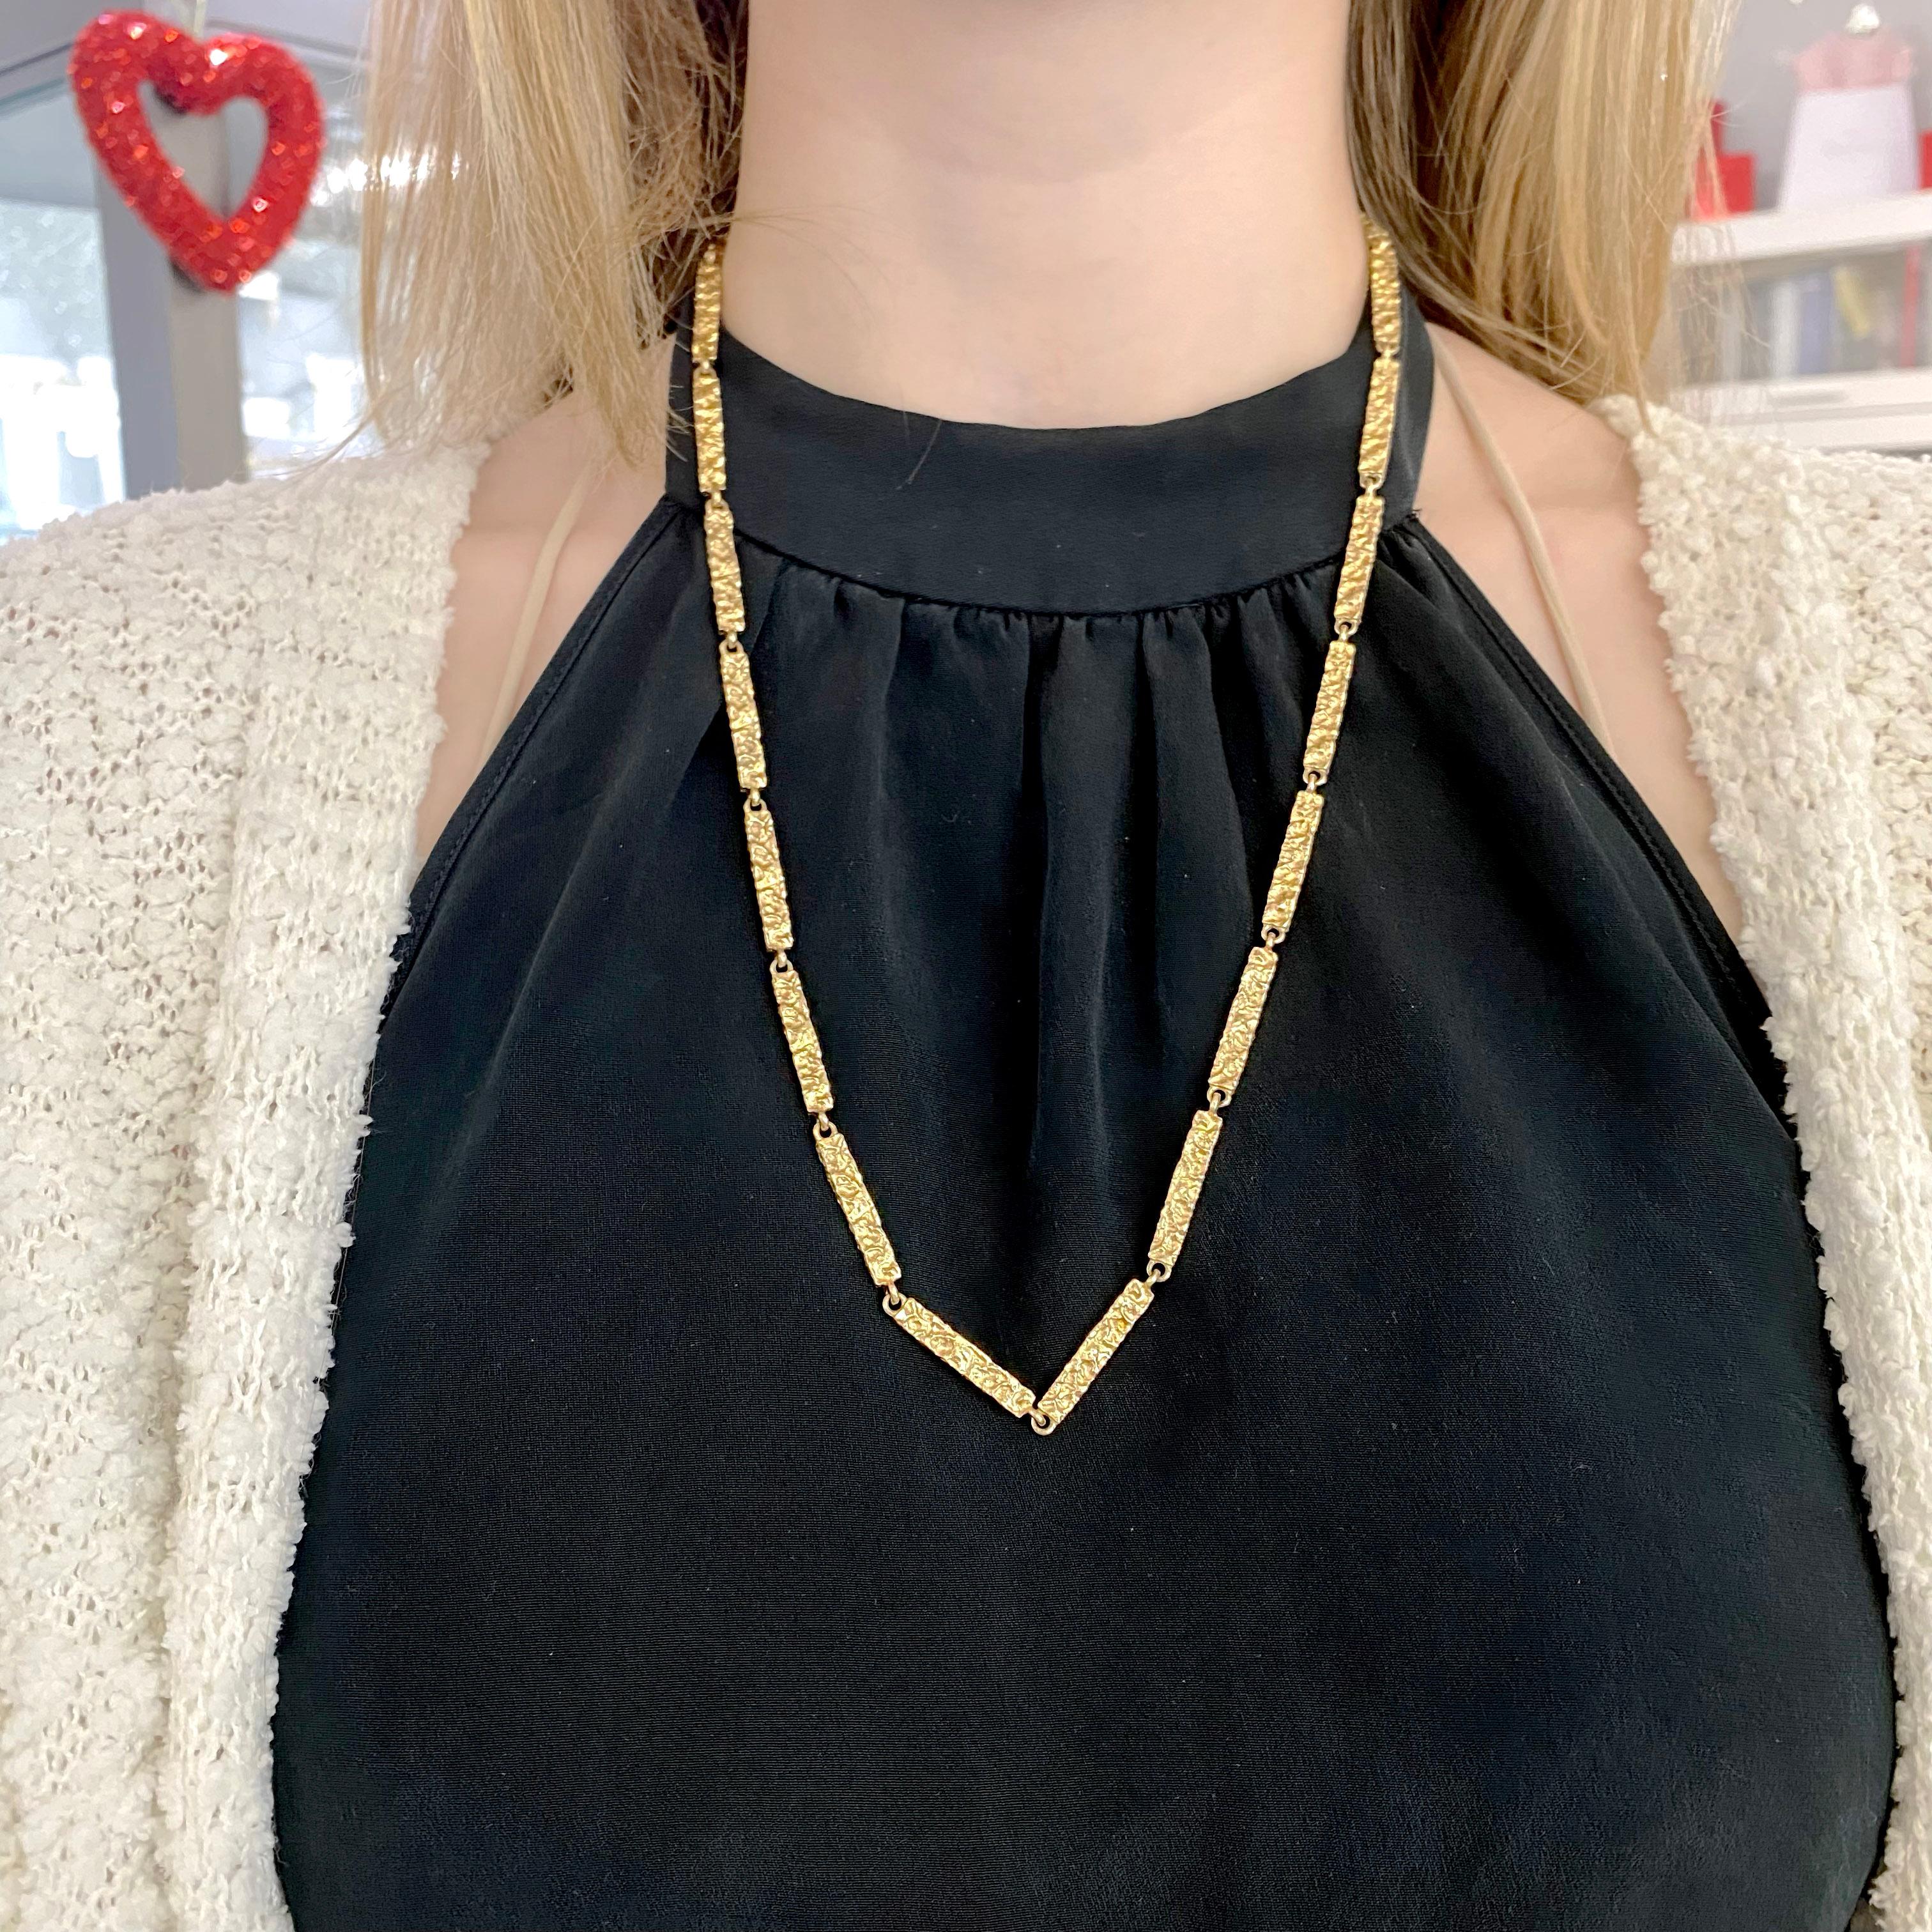 Big, gold jewelry is back and better than ever! Add this chain to your fine jewelry collection as your signature piece and wear it with everything! The details for this beautiful necklace are listed below:
Metal Quality: 14K
Chain Type: Fancy
Chain